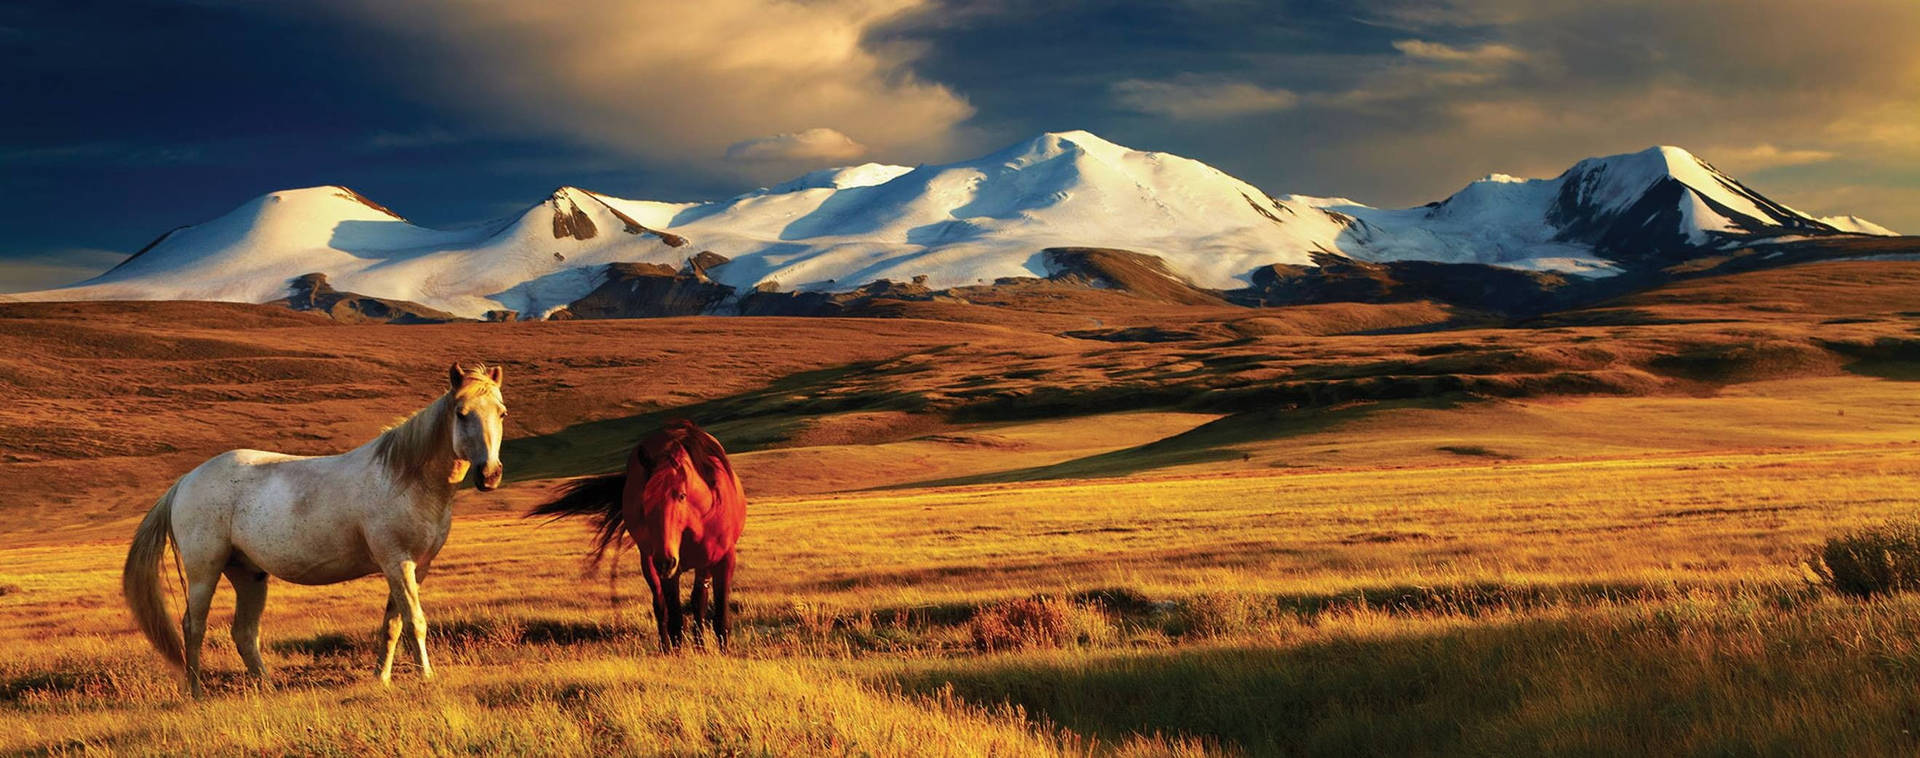 Mongolian Horses In The Pasture